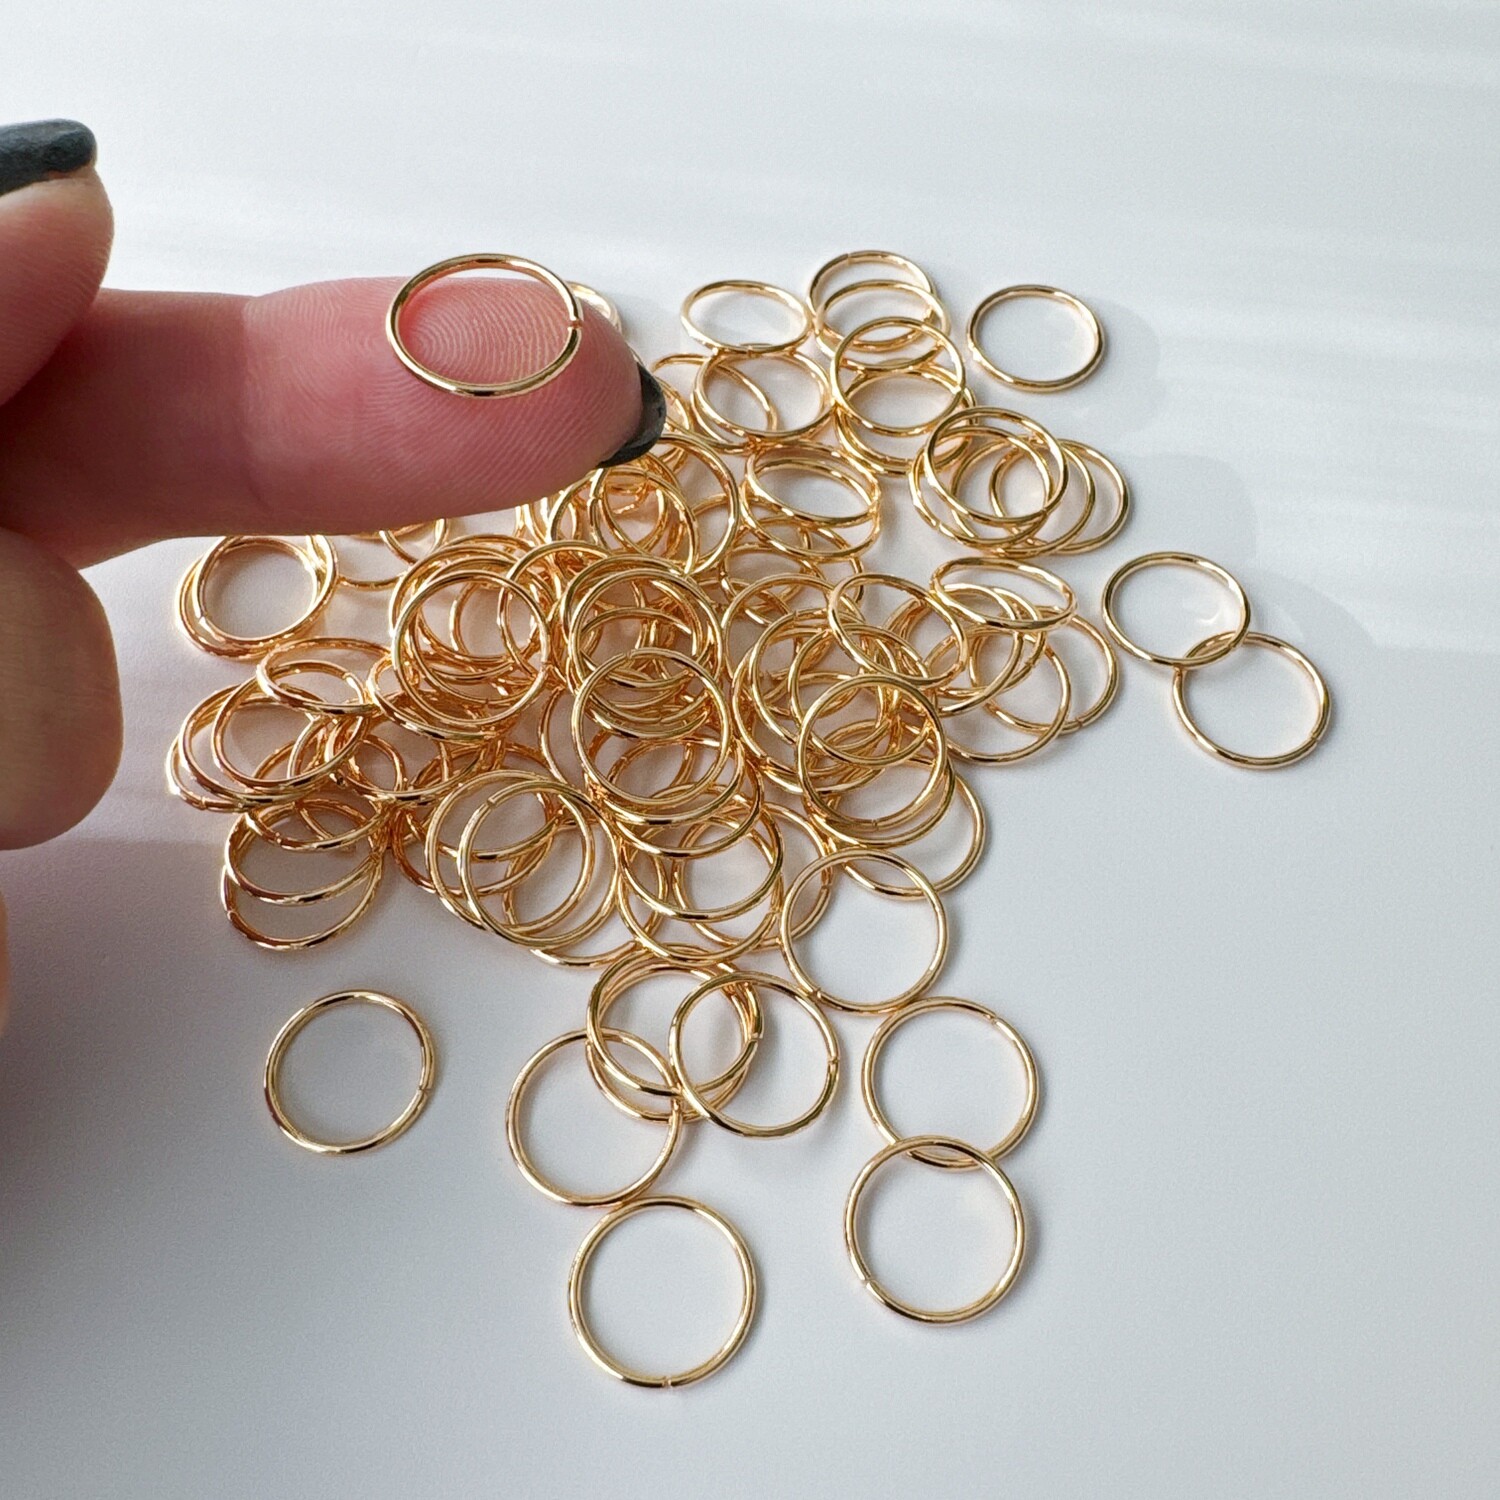 100 Jump Rings, 12mm, Gold-Plated Brass